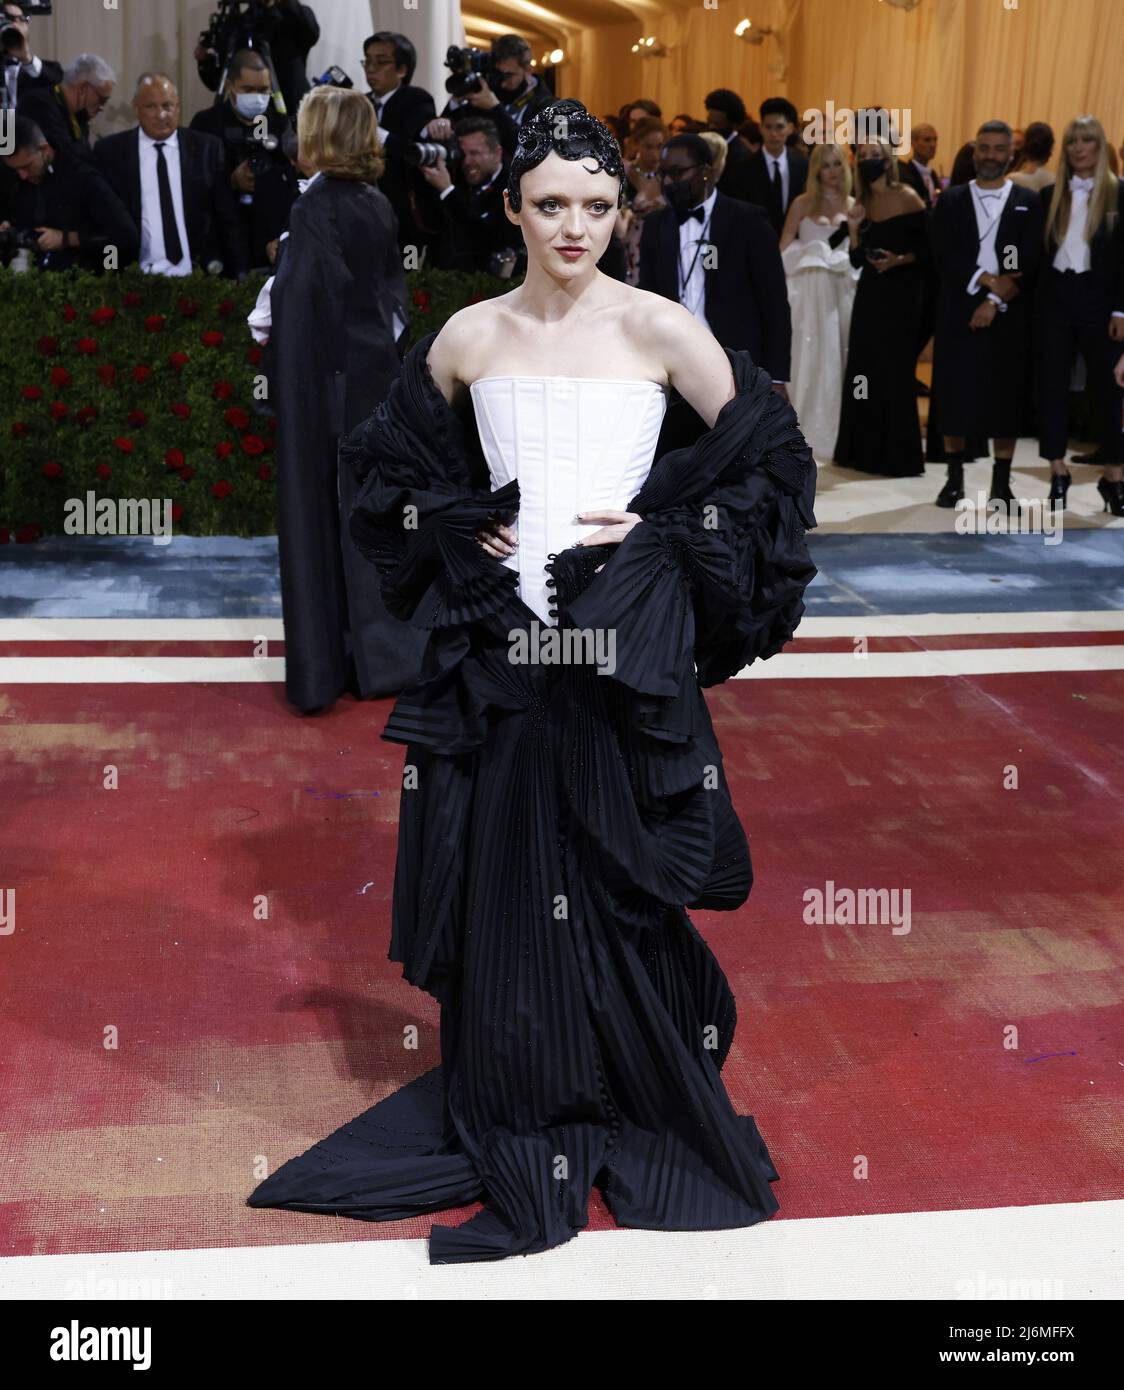 New York, United States. 03rd May, 2022. Maisie Williams arrives on the red carpet for The Met Gala at The Metropolitan Museum of Art celebrating the Costume Institute opening of 'In America: An Anthology of Fashion' in New York City on Monday, May 2, 2022. Photo by John Angelillo/UPI Credit: UPI/Alamy Live News Stock Photo